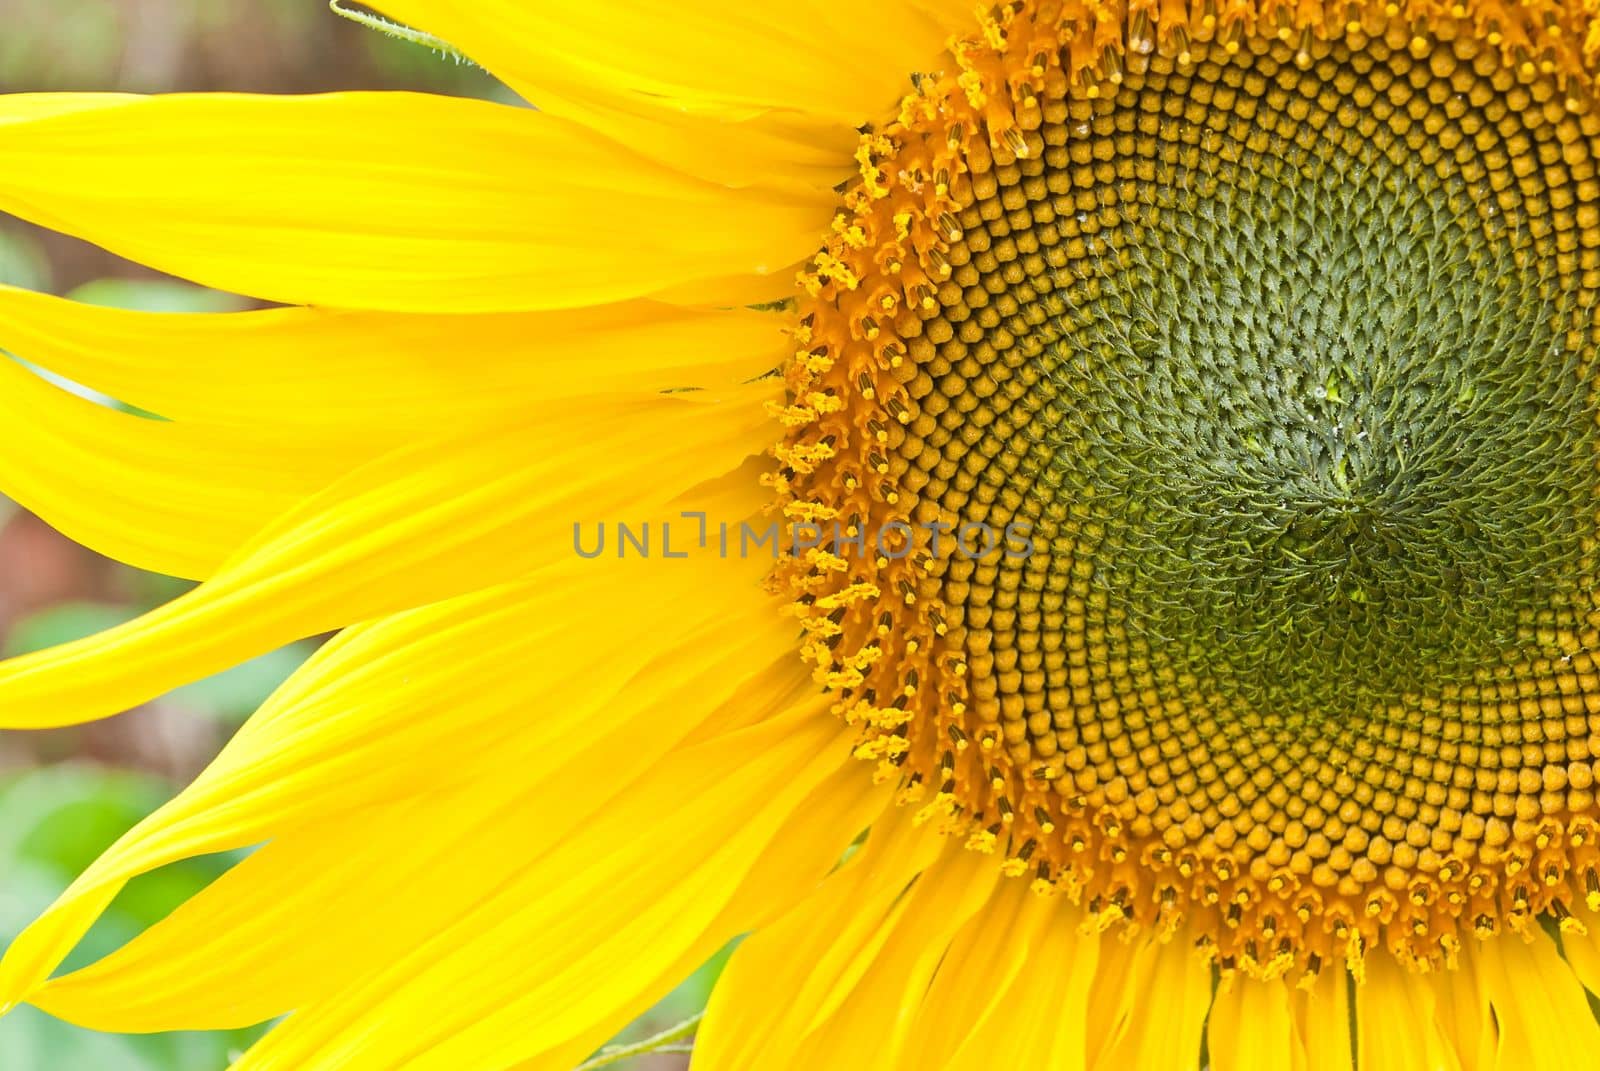 beutiful close-up sunflower in cultivated agricultural field